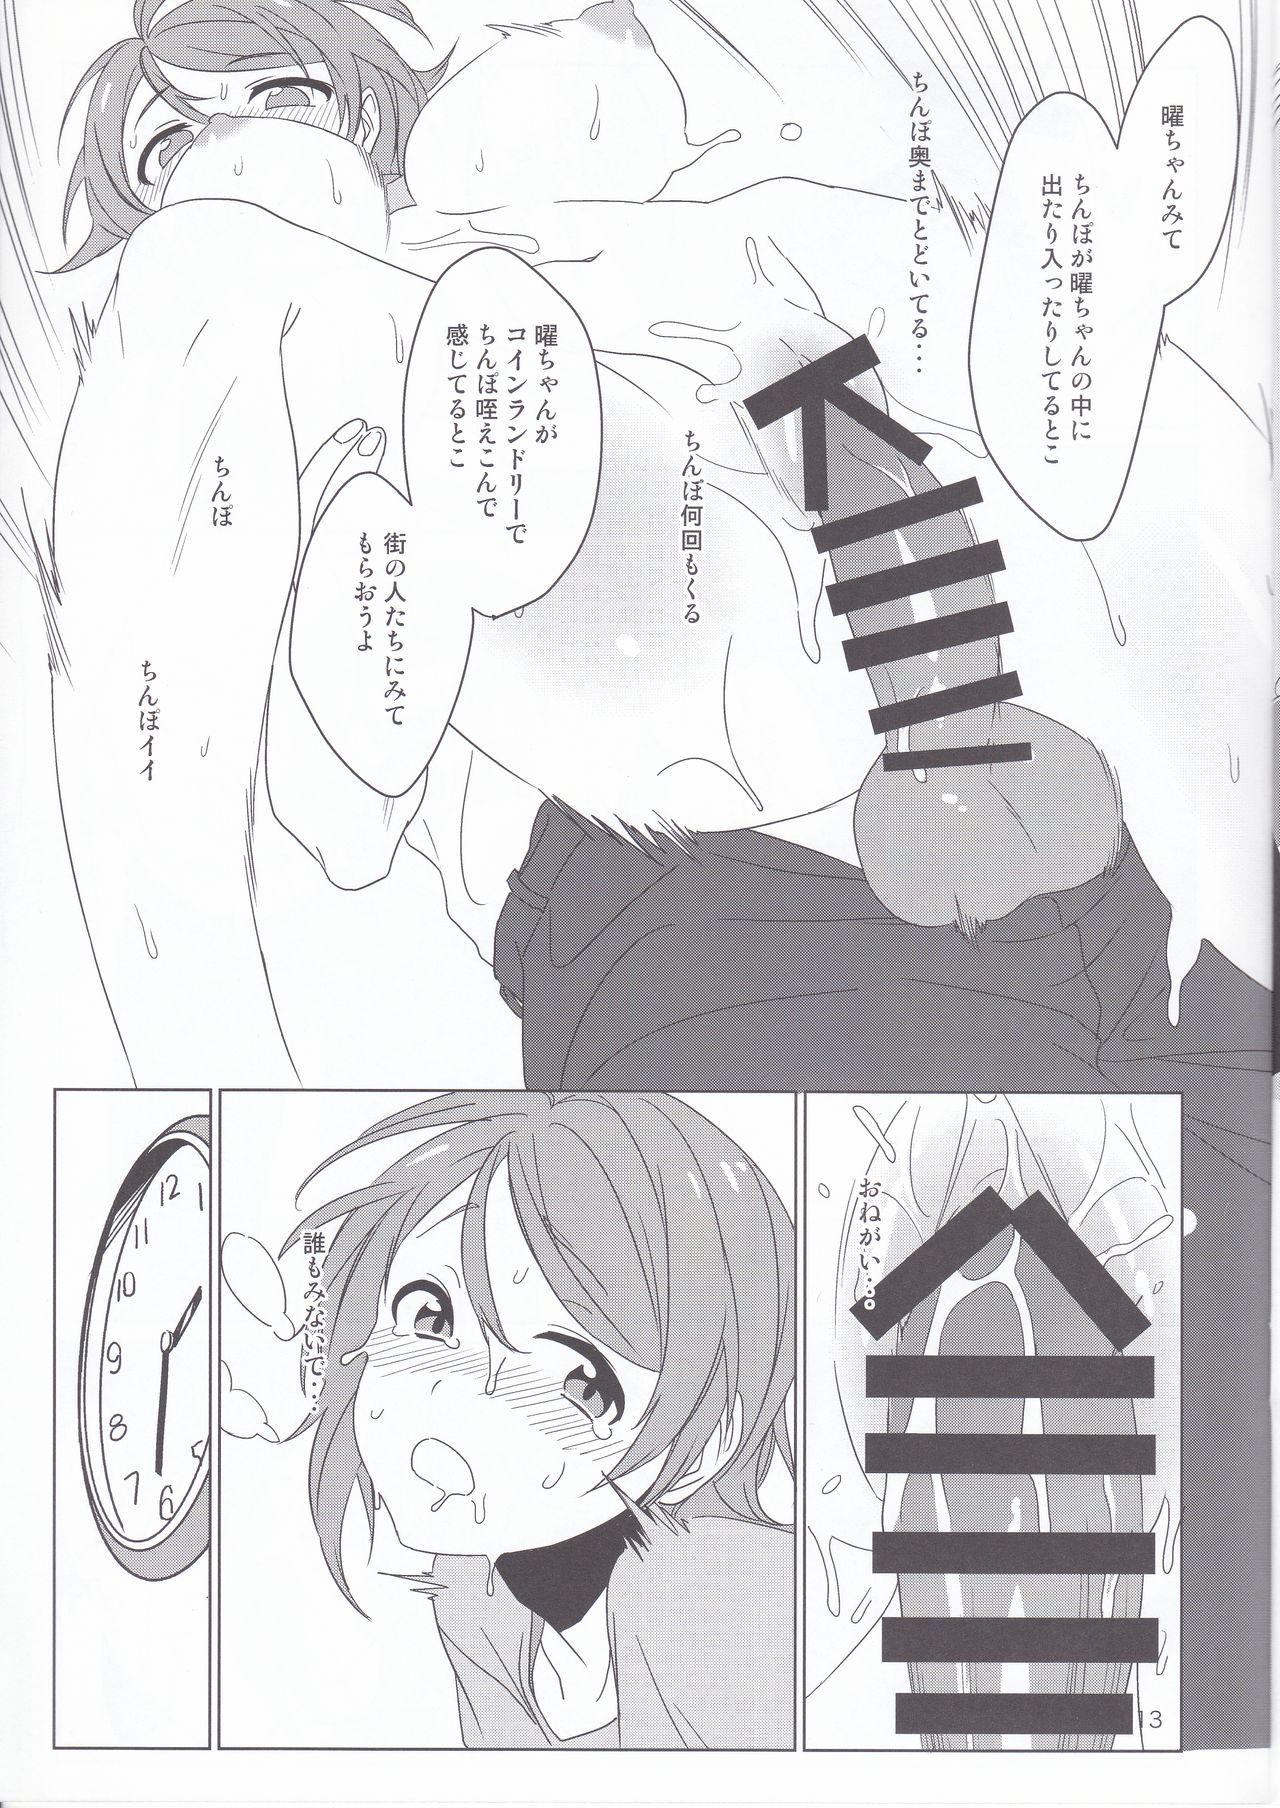 Double Coin laundry - Love live sunshine Web - Page 12